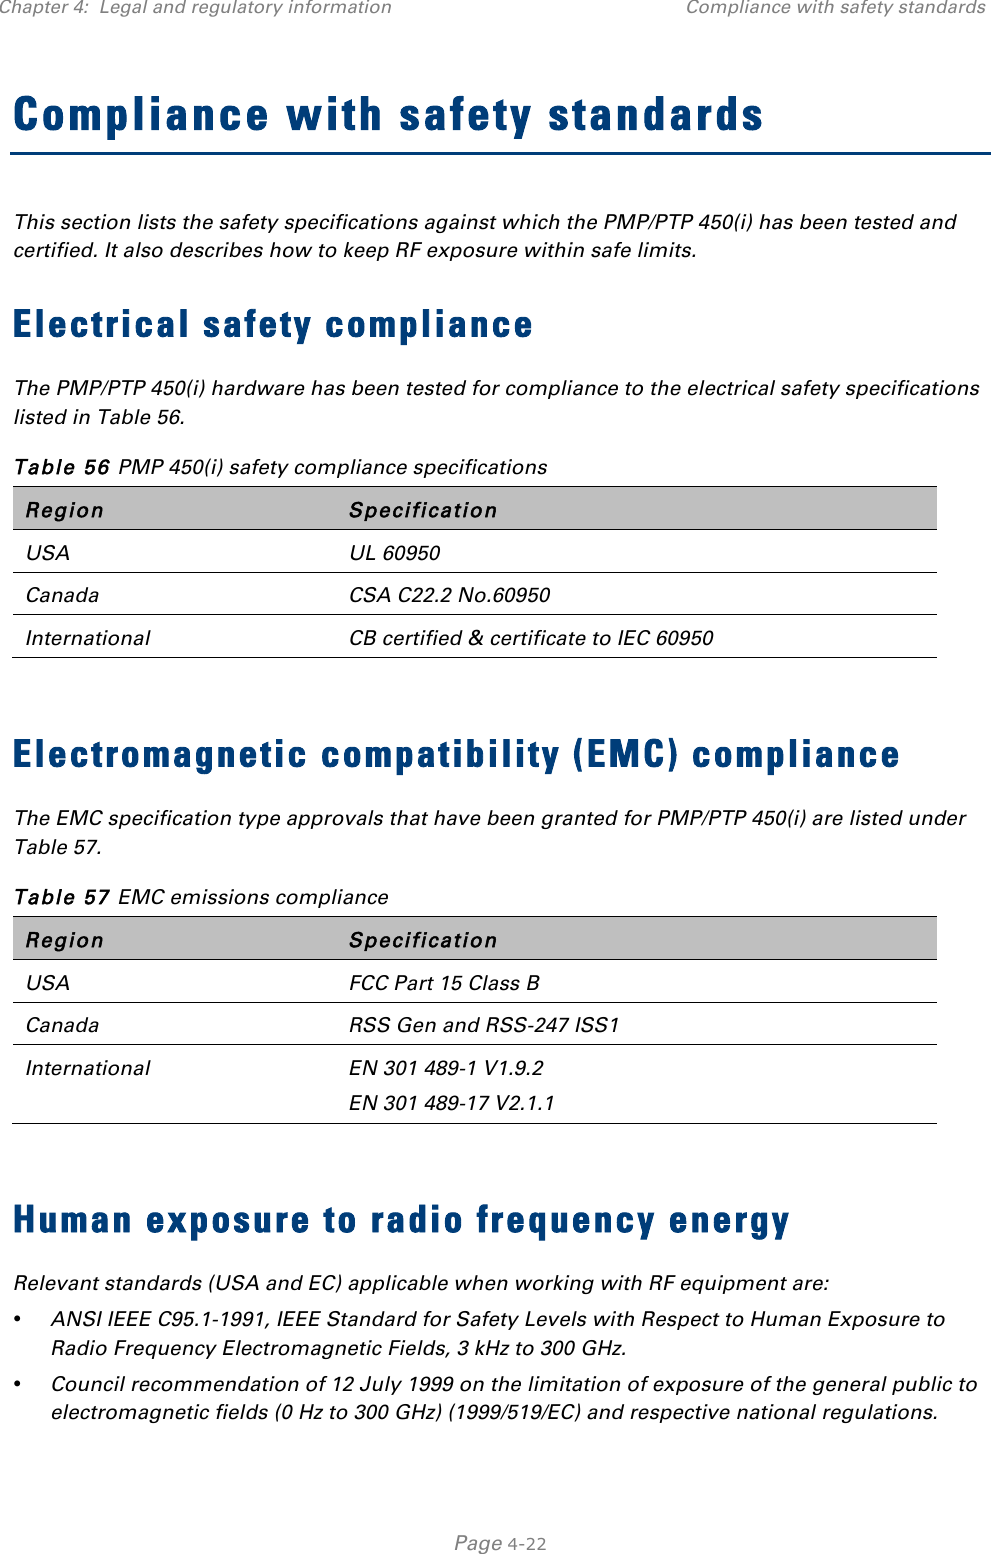 Chapter 4:  Legal and regulatory information Compliance with safety standards   Page 4-22 Compliance with safety standards This section lists the safety specifications against which the PMP/PTP 450(i) has been tested and certified. It also describes how to keep RF exposure within safe limits. Electrical safety compliance  The PMP/PTP 450(i) hardware has been tested for compliance to the electrical safety specifications listed in Table 56. Table 56 PMP 450(i) safety compliance specifications Region Specification USA UL 60950 Canada CSA C22.2 No.60950 International CB certified &amp; certificate to IEC 60950  Electromagnetic compatibility (EMC) compliance The EMC specification type approvals that have been granted for PMP/PTP 450(i) are listed under Table 57. Table 57 EMC emissions compliance Region Specification USA FCC Part 15 Class B Canada RSS Gen and RSS-247 ISS1 International EN 301 489-1 V1.9.2 EN 301 489-17 V2.1.1  Human exposure to radio frequency energy Relevant standards (USA and EC) applicable when working with RF equipment are: • ANSI IEEE C95.1-1991, IEEE Standard for Safety Levels with Respect to Human Exposure to Radio Frequency Electromagnetic Fields, 3 kHz to 300 GHz. • Council recommendation of 12 July 1999 on the limitation of exposure of the general public to electromagnetic fields (0 Hz to 300 GHz) (1999/519/EC) and respective national regulations. 